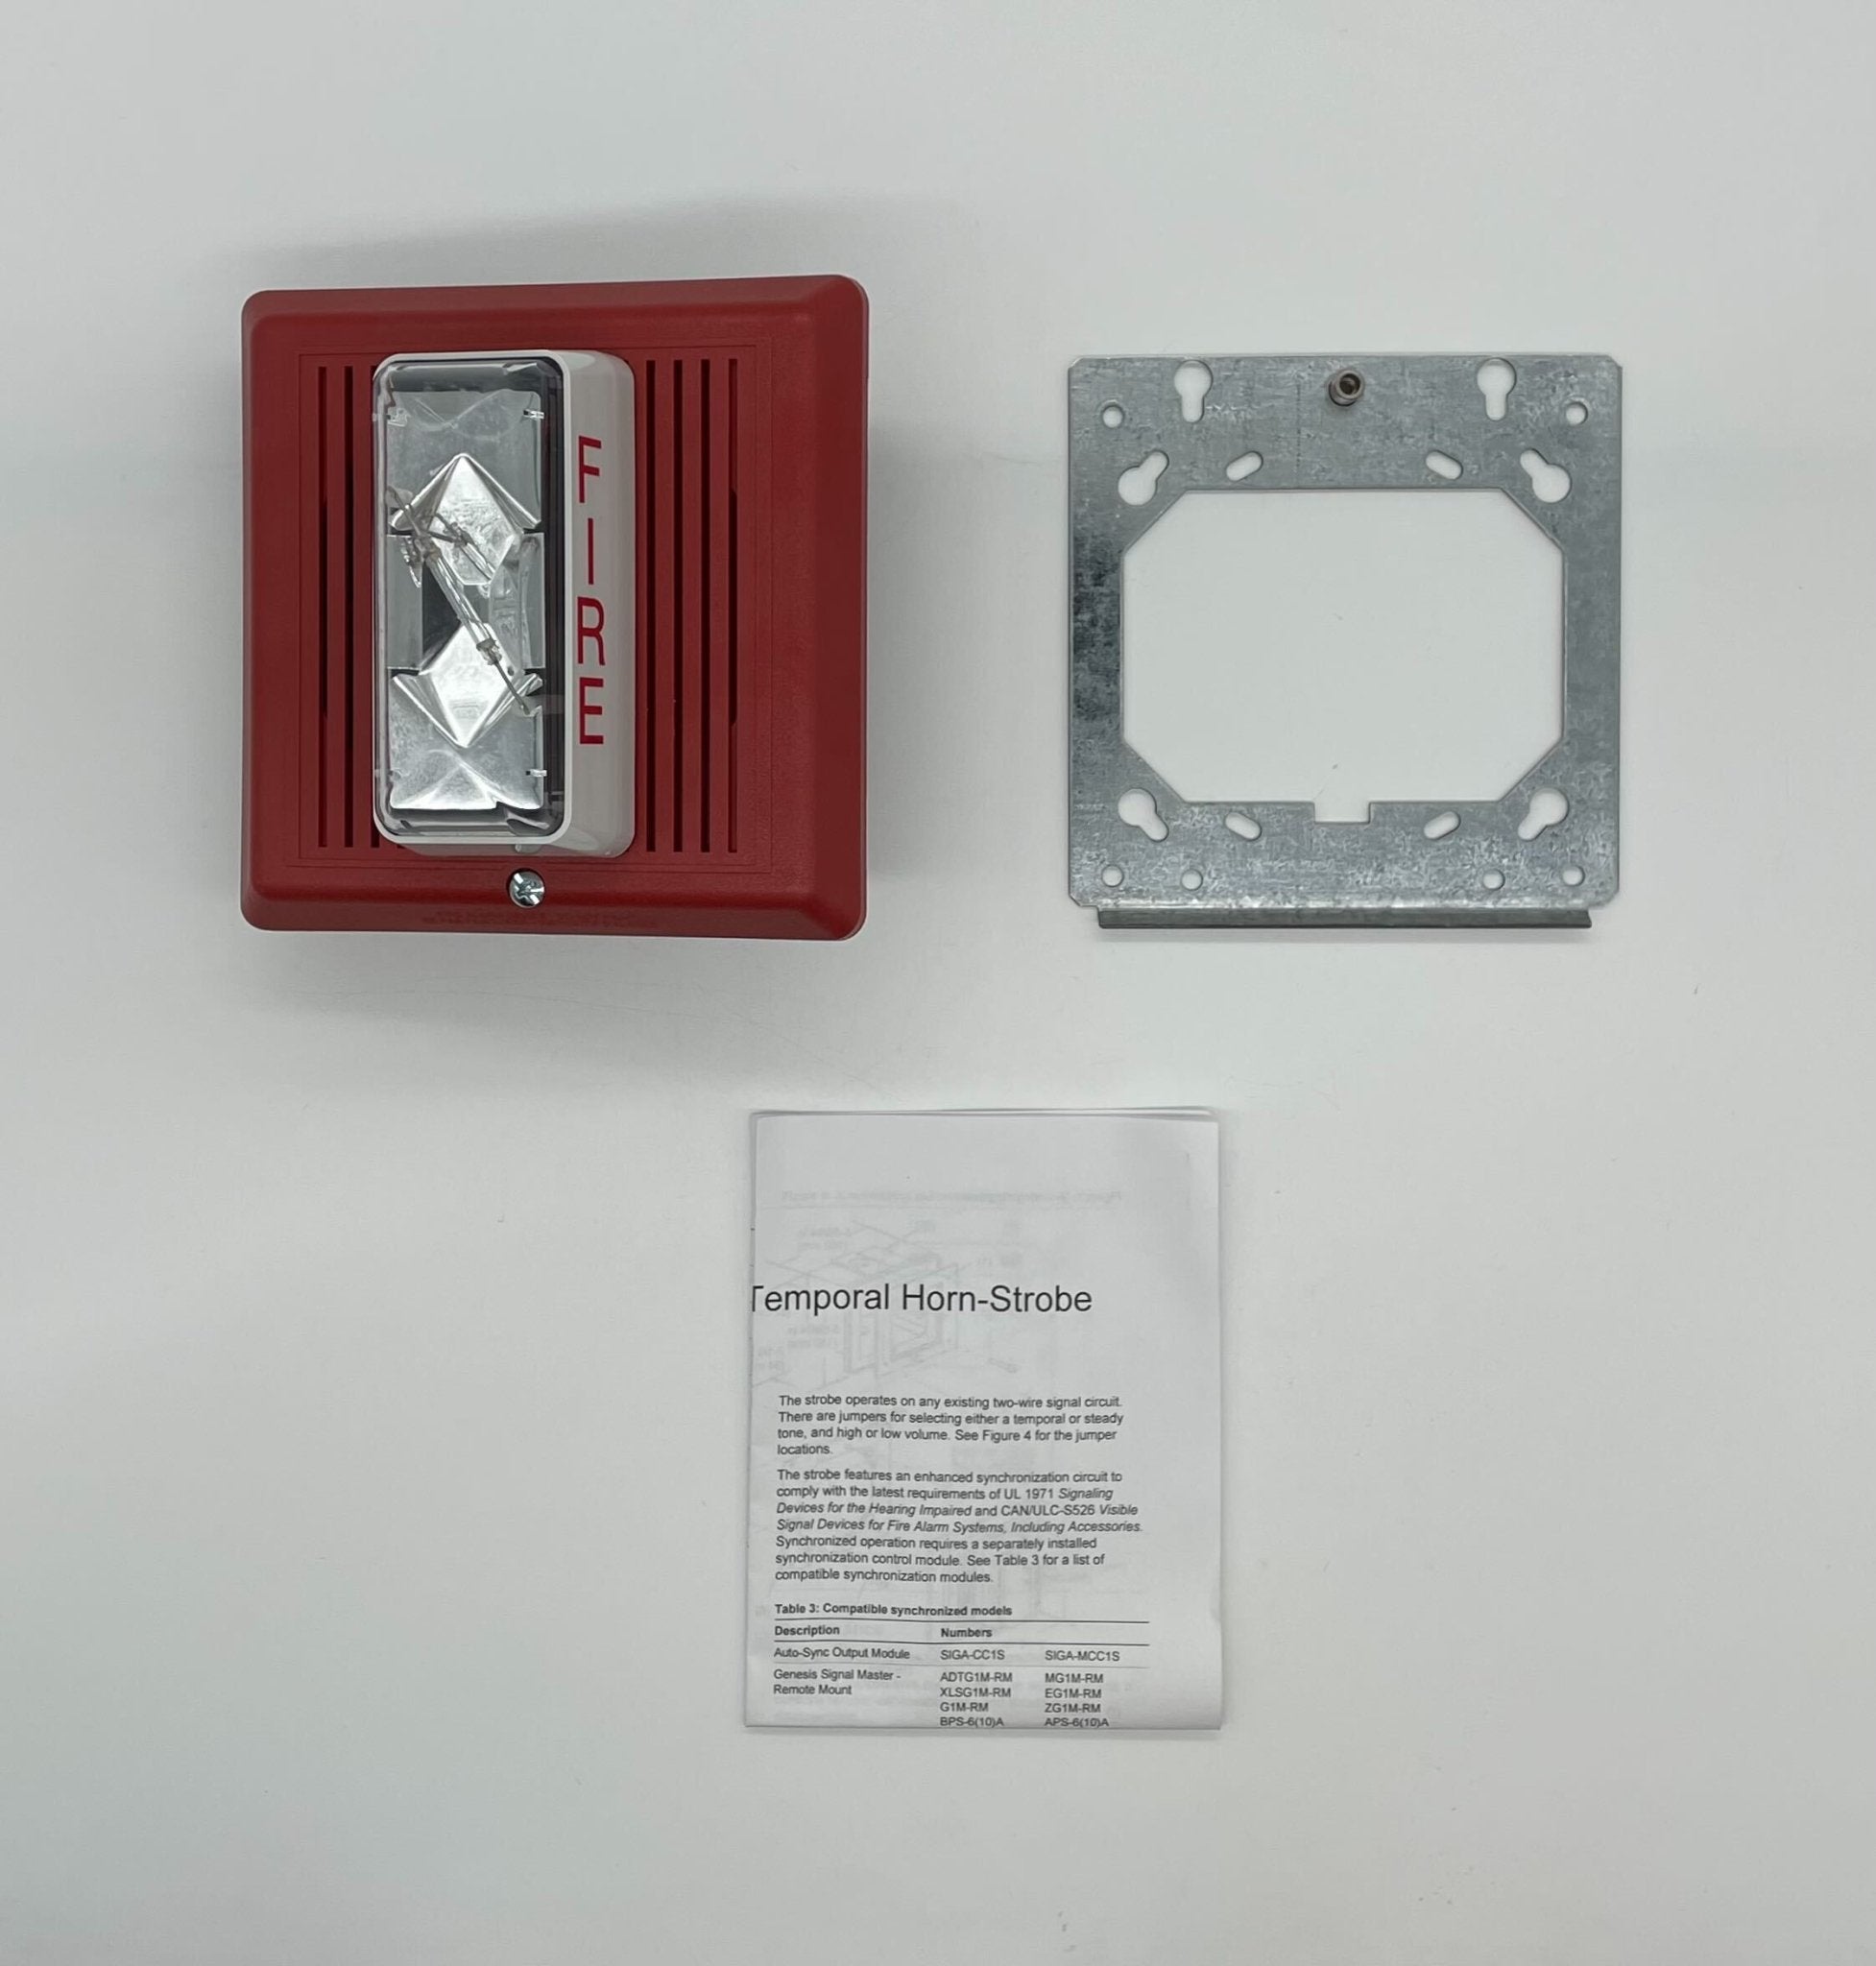 Edwards 2452THS-15/75-R - The Fire Alarm Supplier